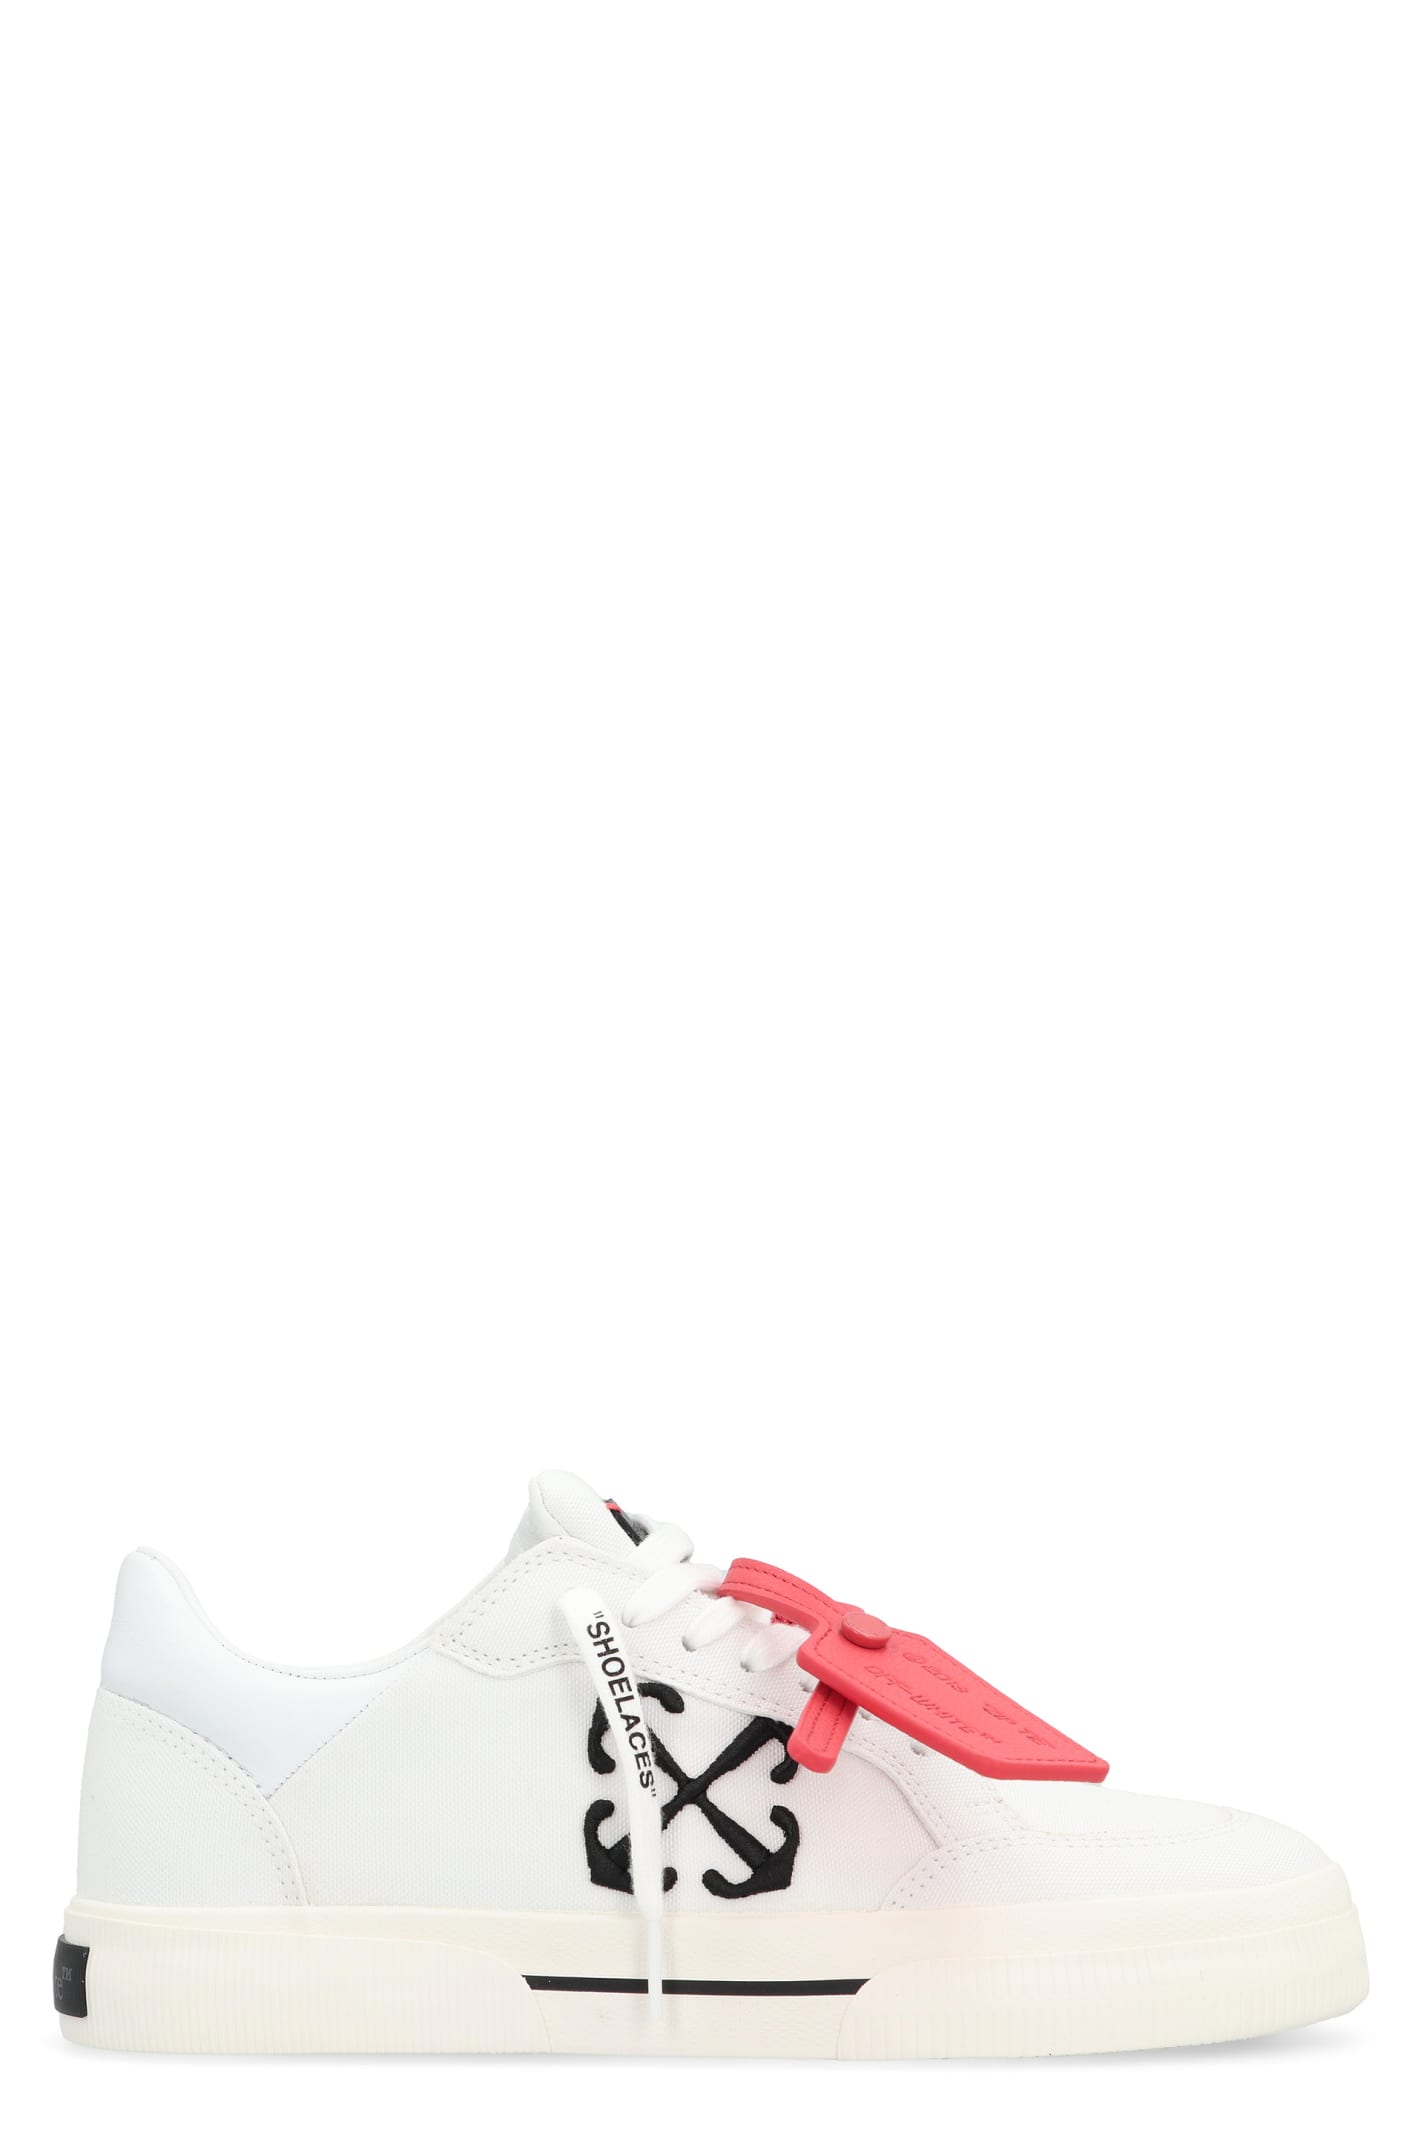 OFF-WHITE NEW VULCANIZED CANVAS LOW-TOP SNEAKERS